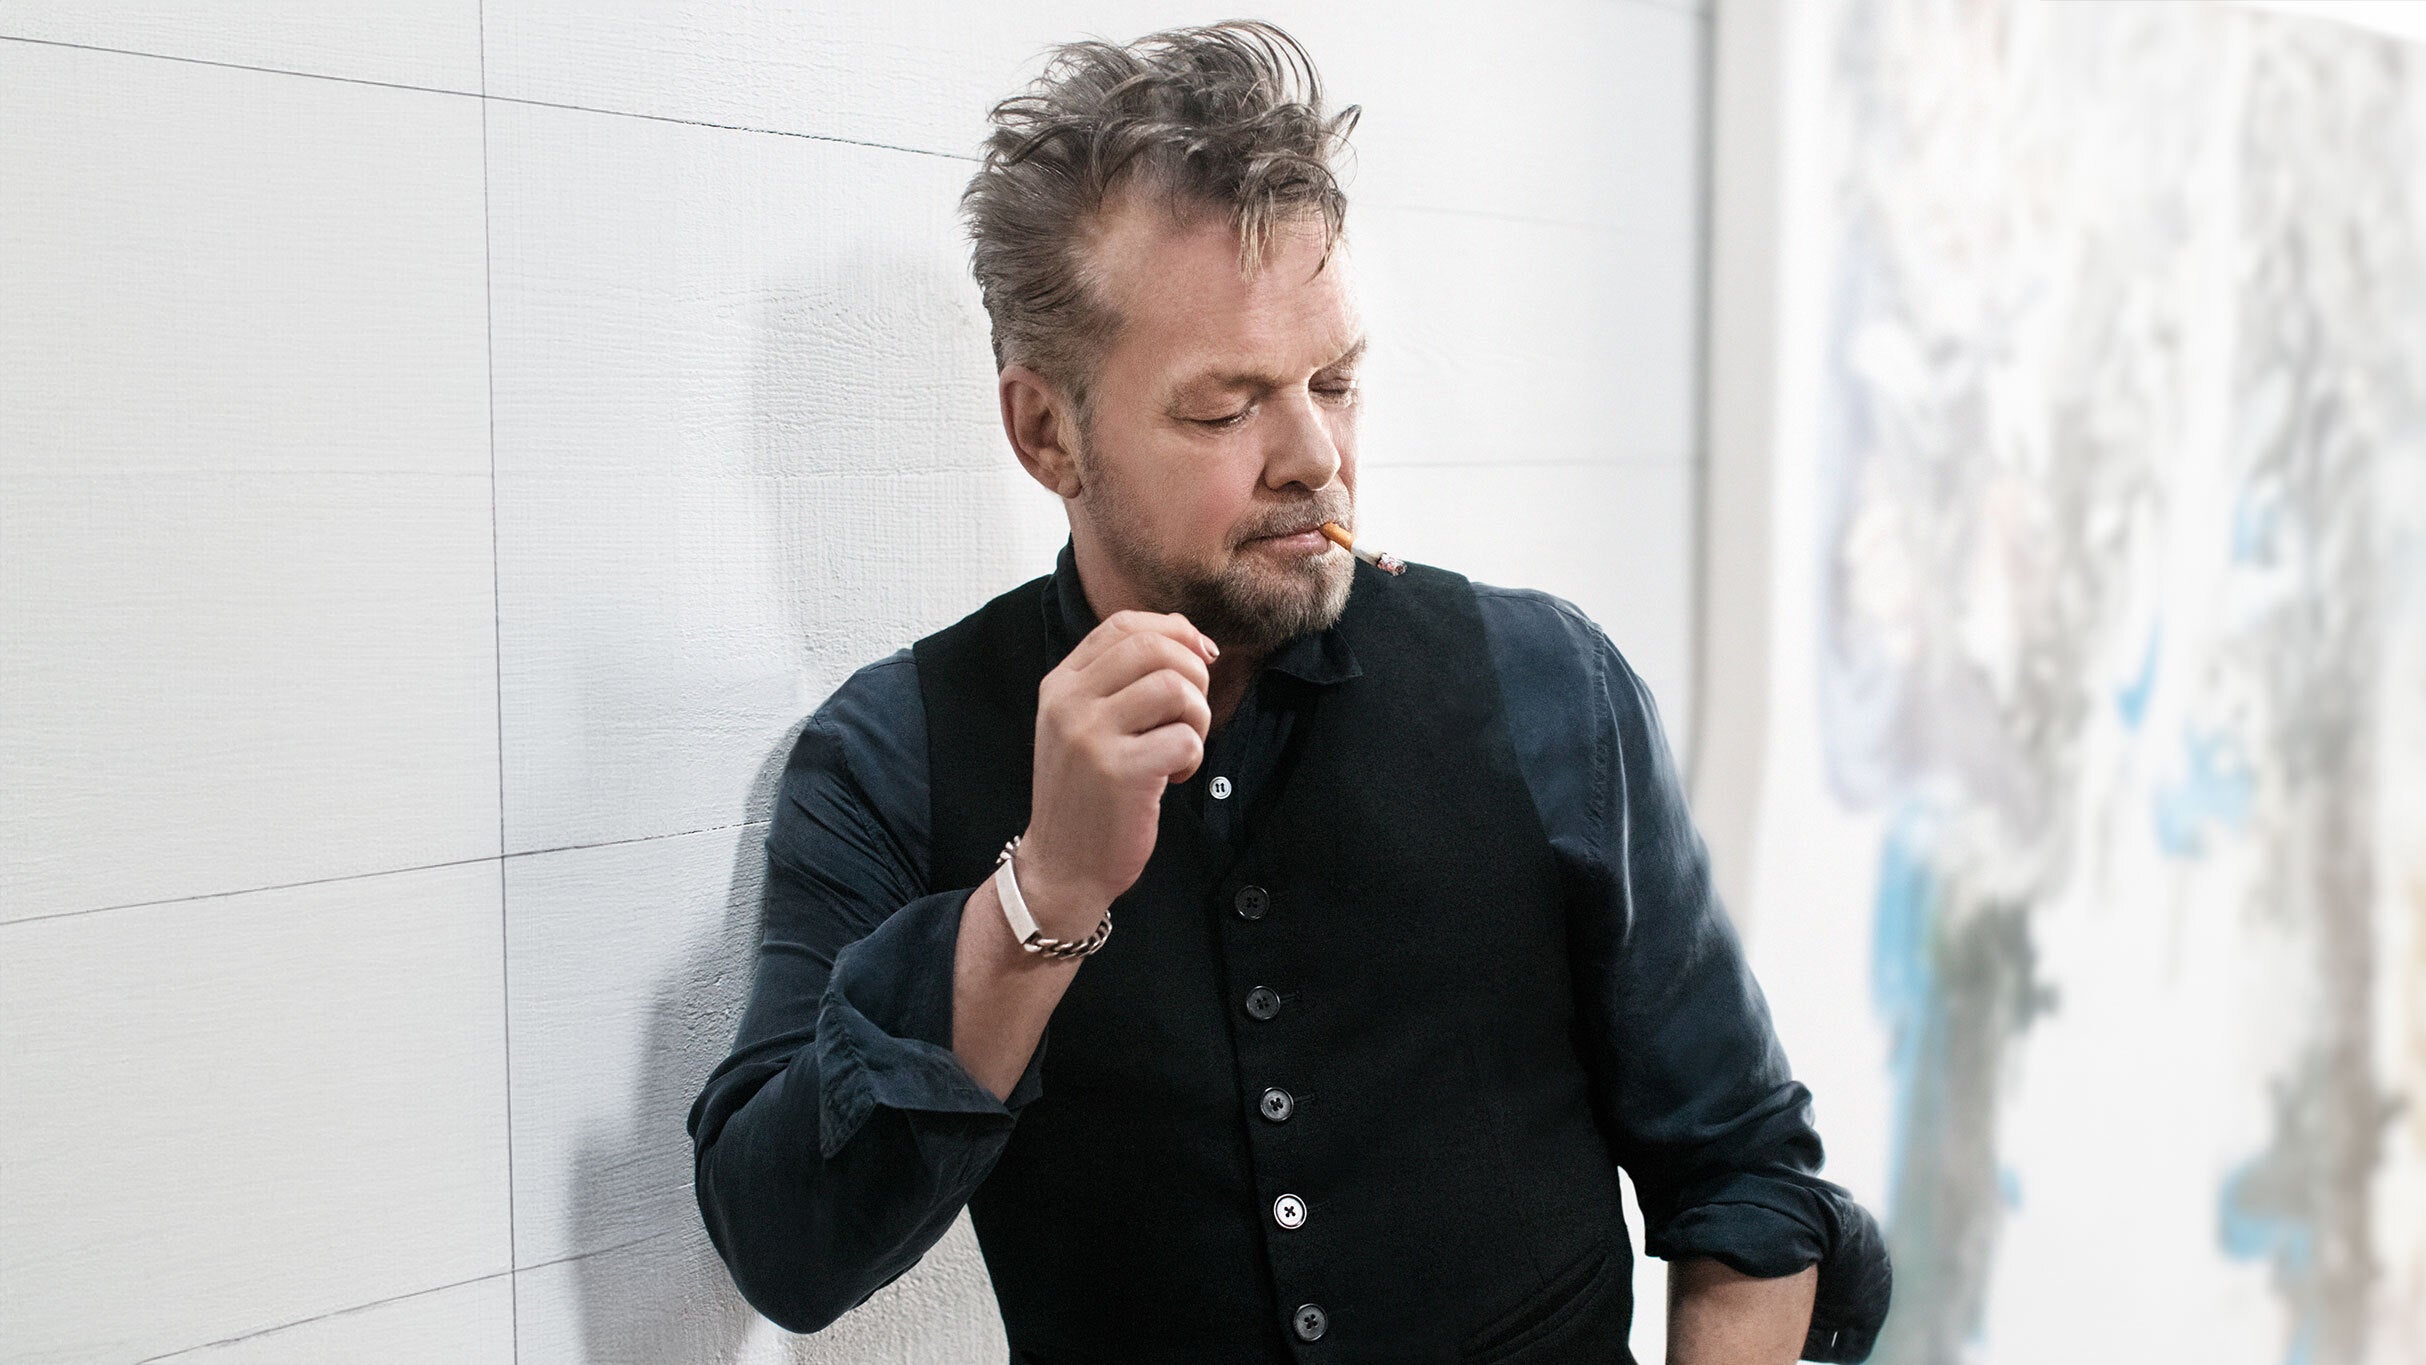 John Mellencamp: Live and In Person at DAR Constitution Hall